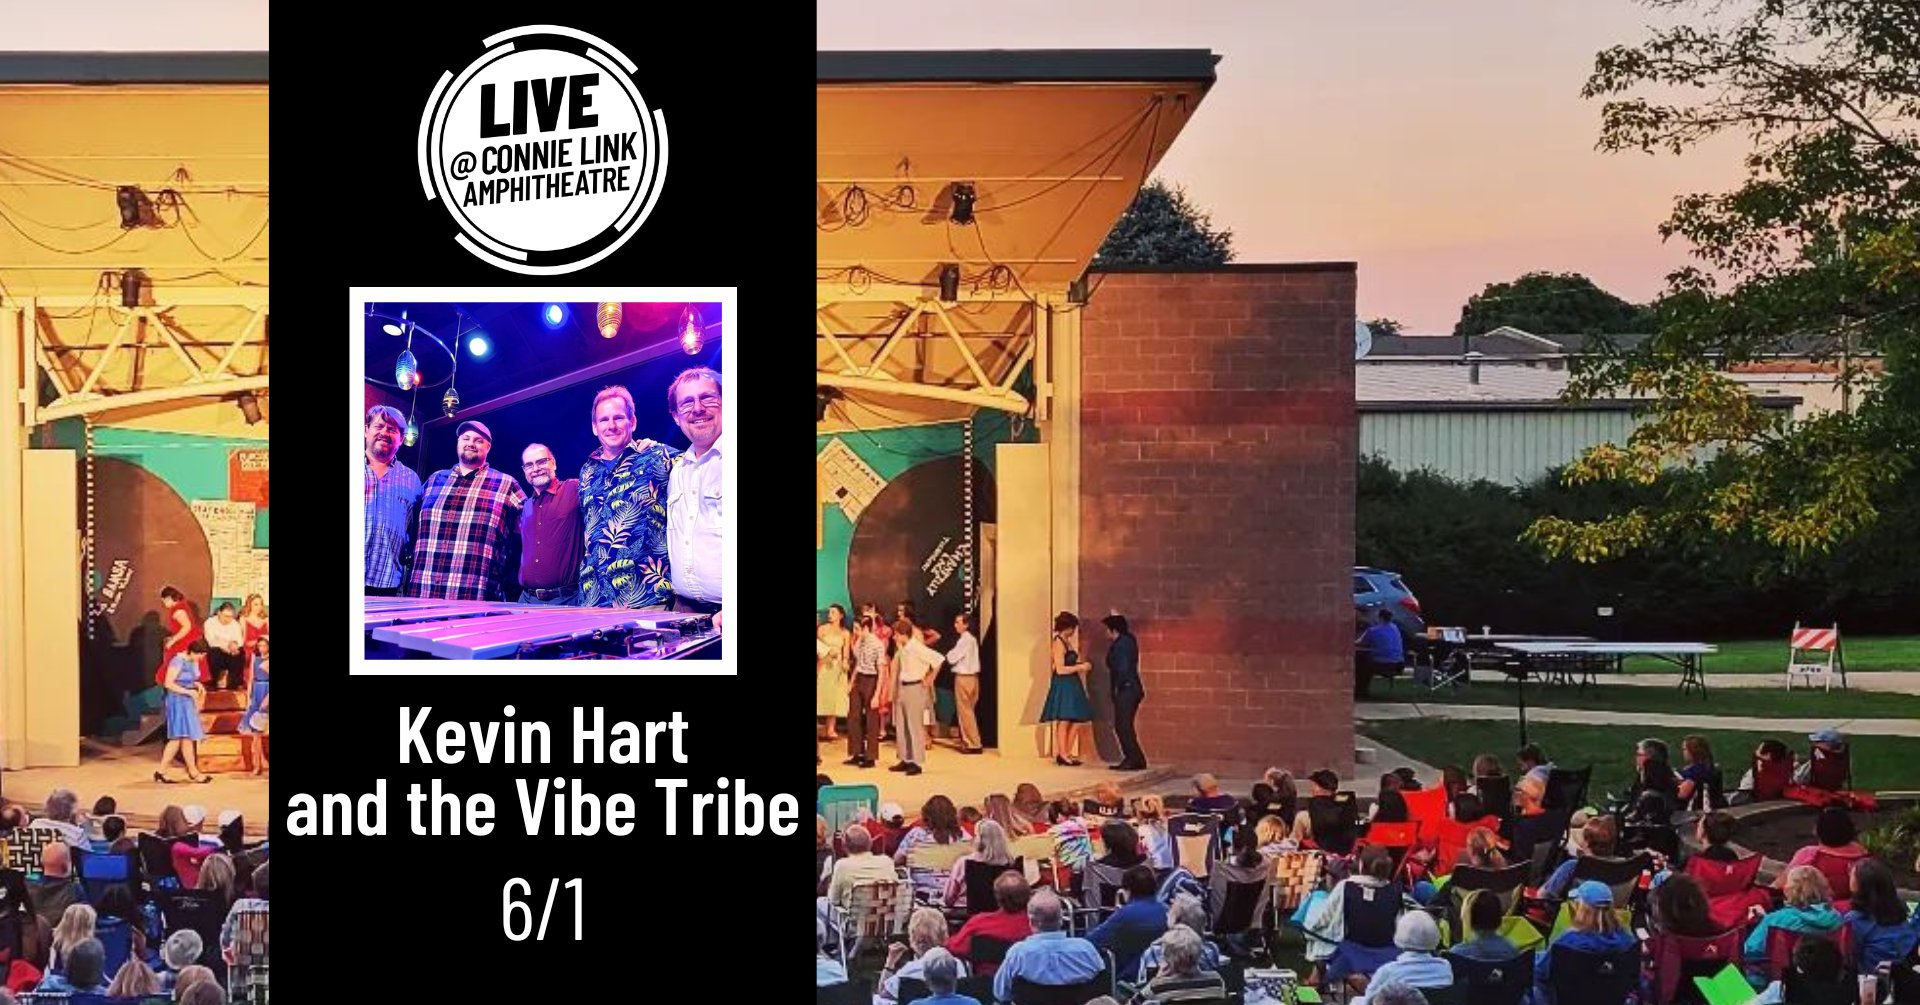 Normal LIVE presents Kevin Hart and the Vibe Tribe @ Connie Link Amphitheatre